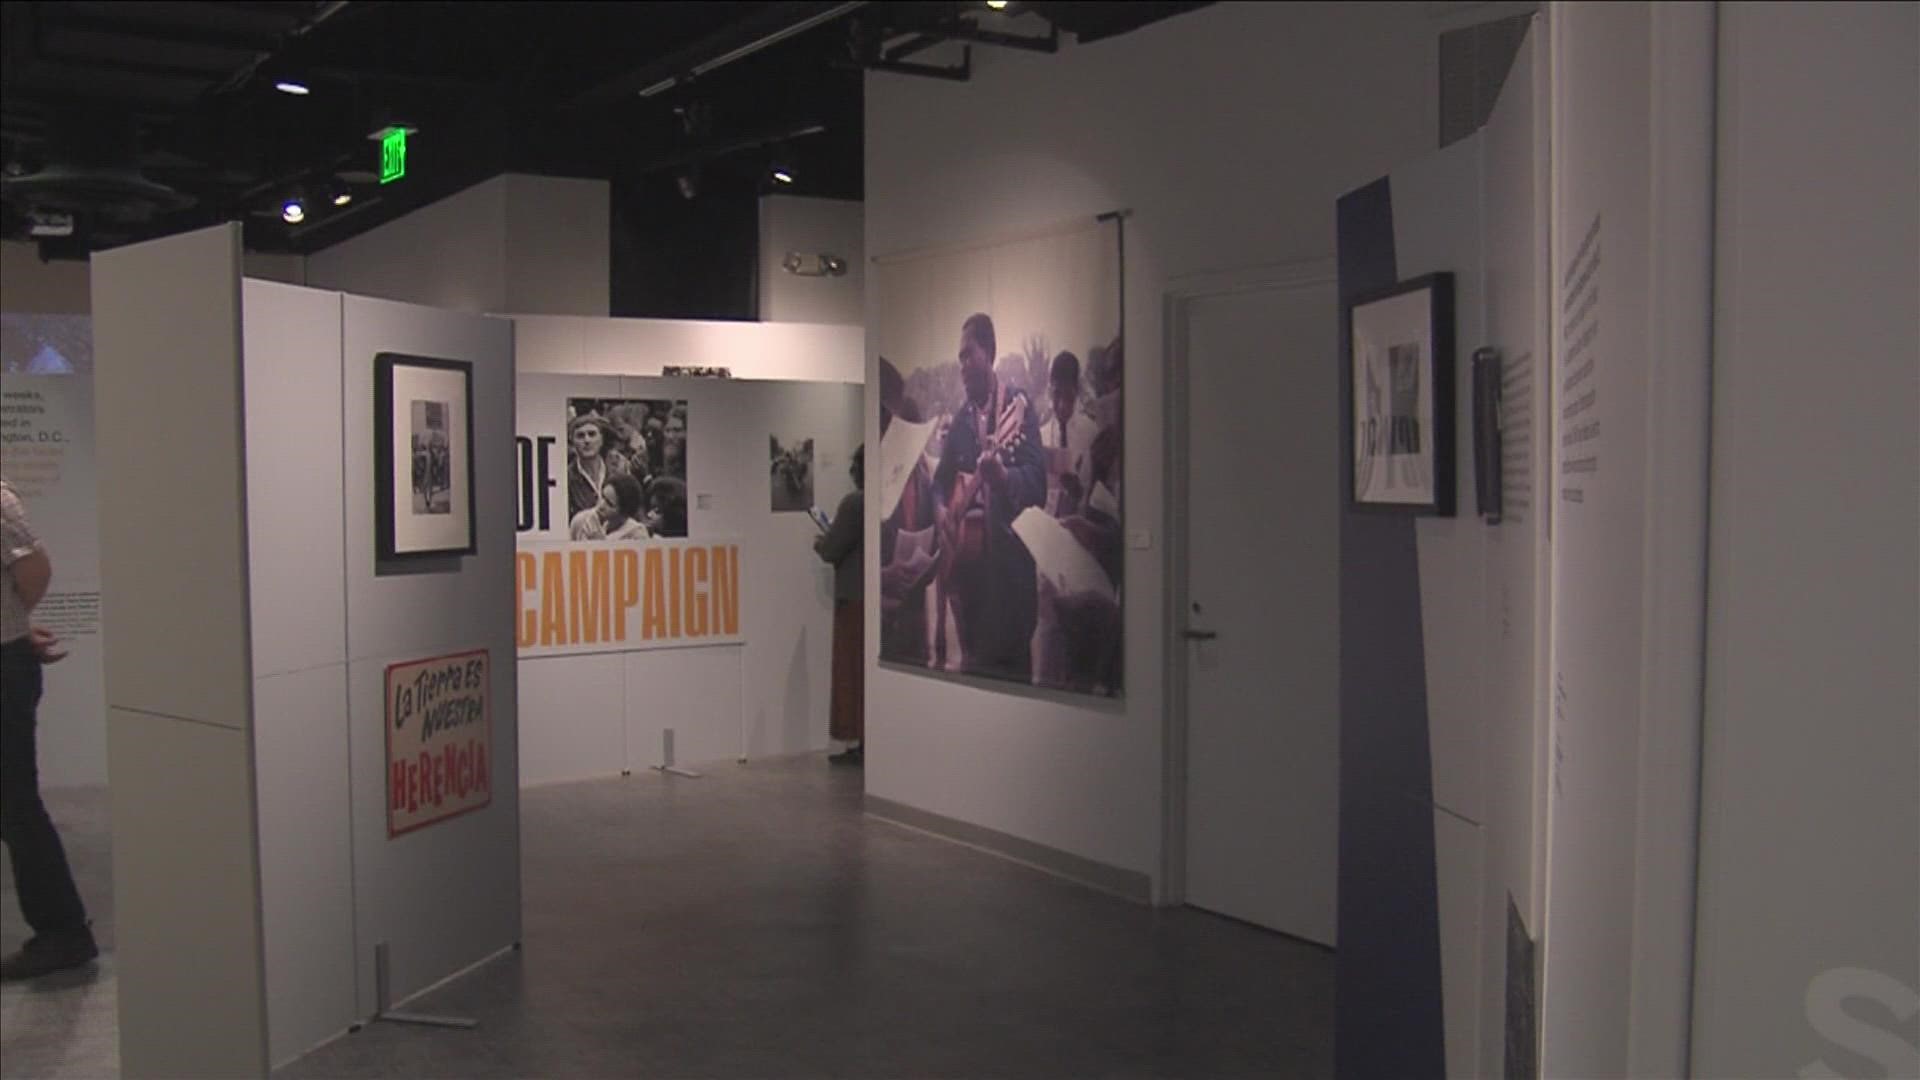 The exhibit is on display through July 31, 2022, and it's free with admission to the museum.